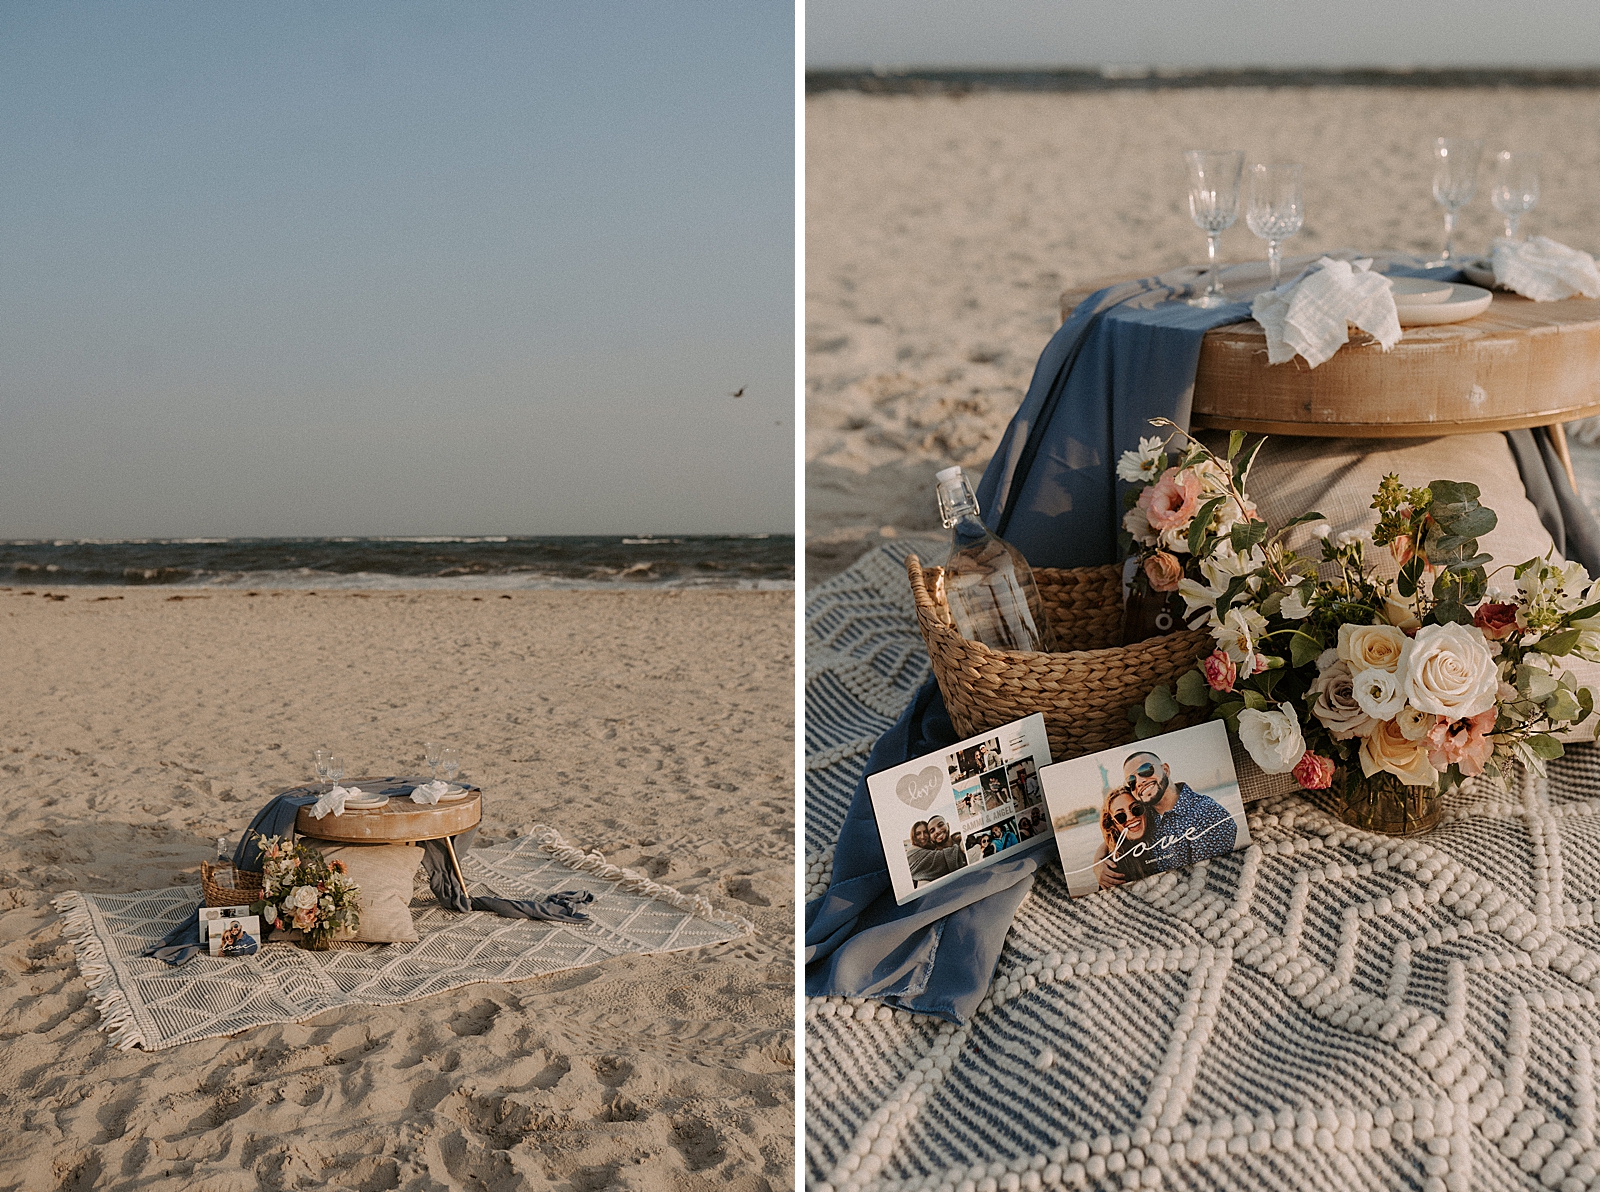 Detail shot of beach towel setup with pictures and flowers